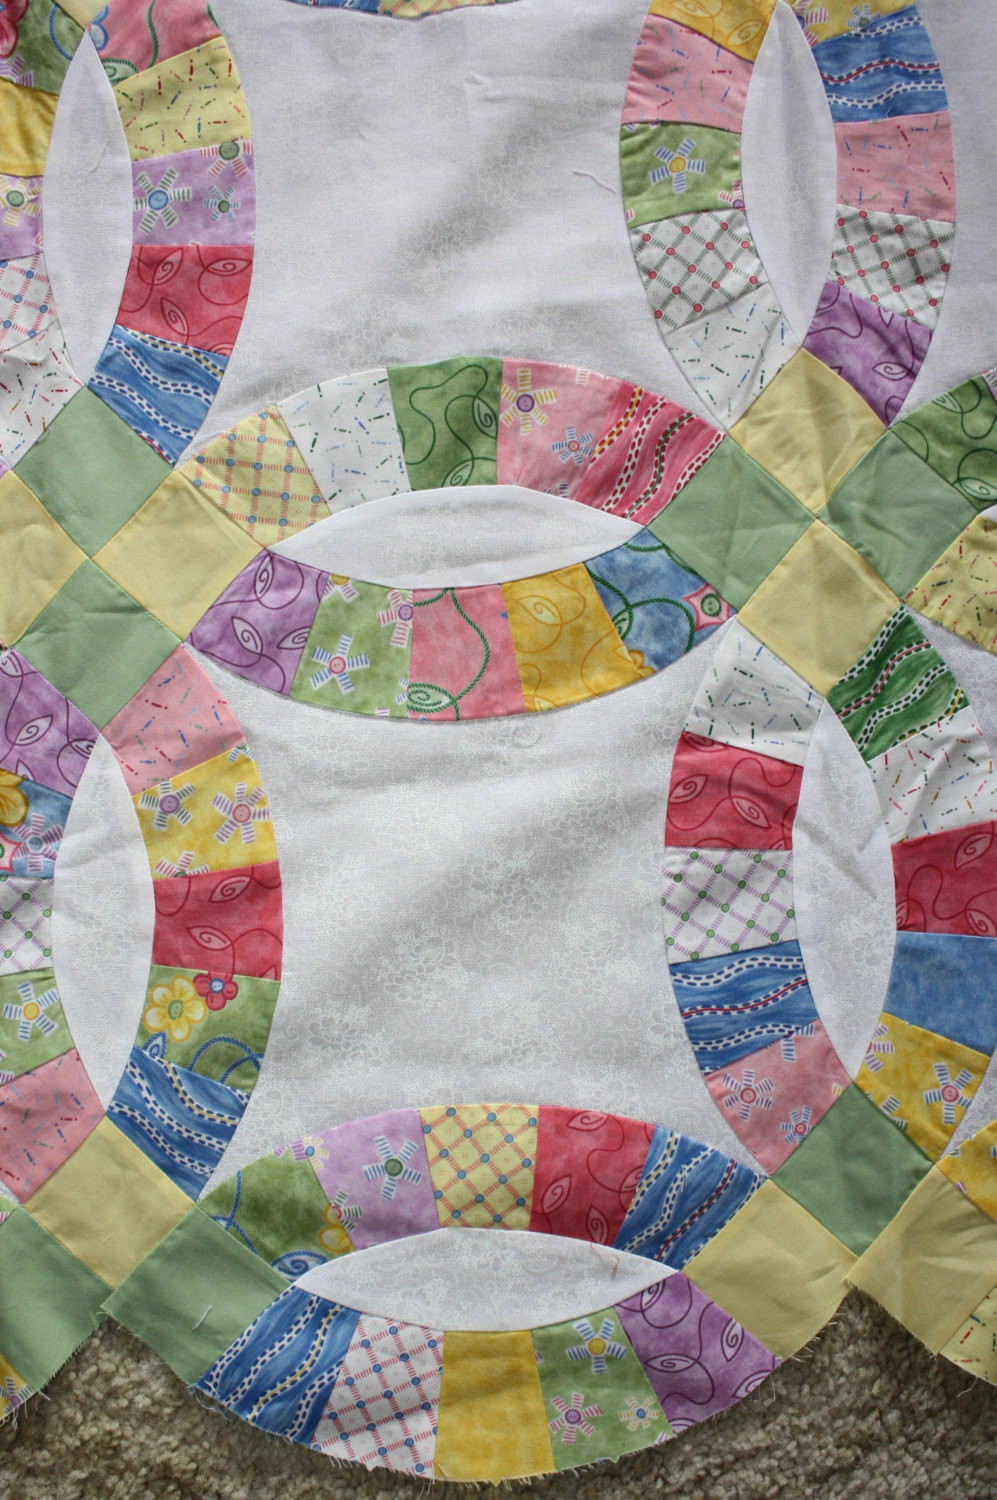 Wedding Ring Quilt
 Double Wedding Ring Quilt Top